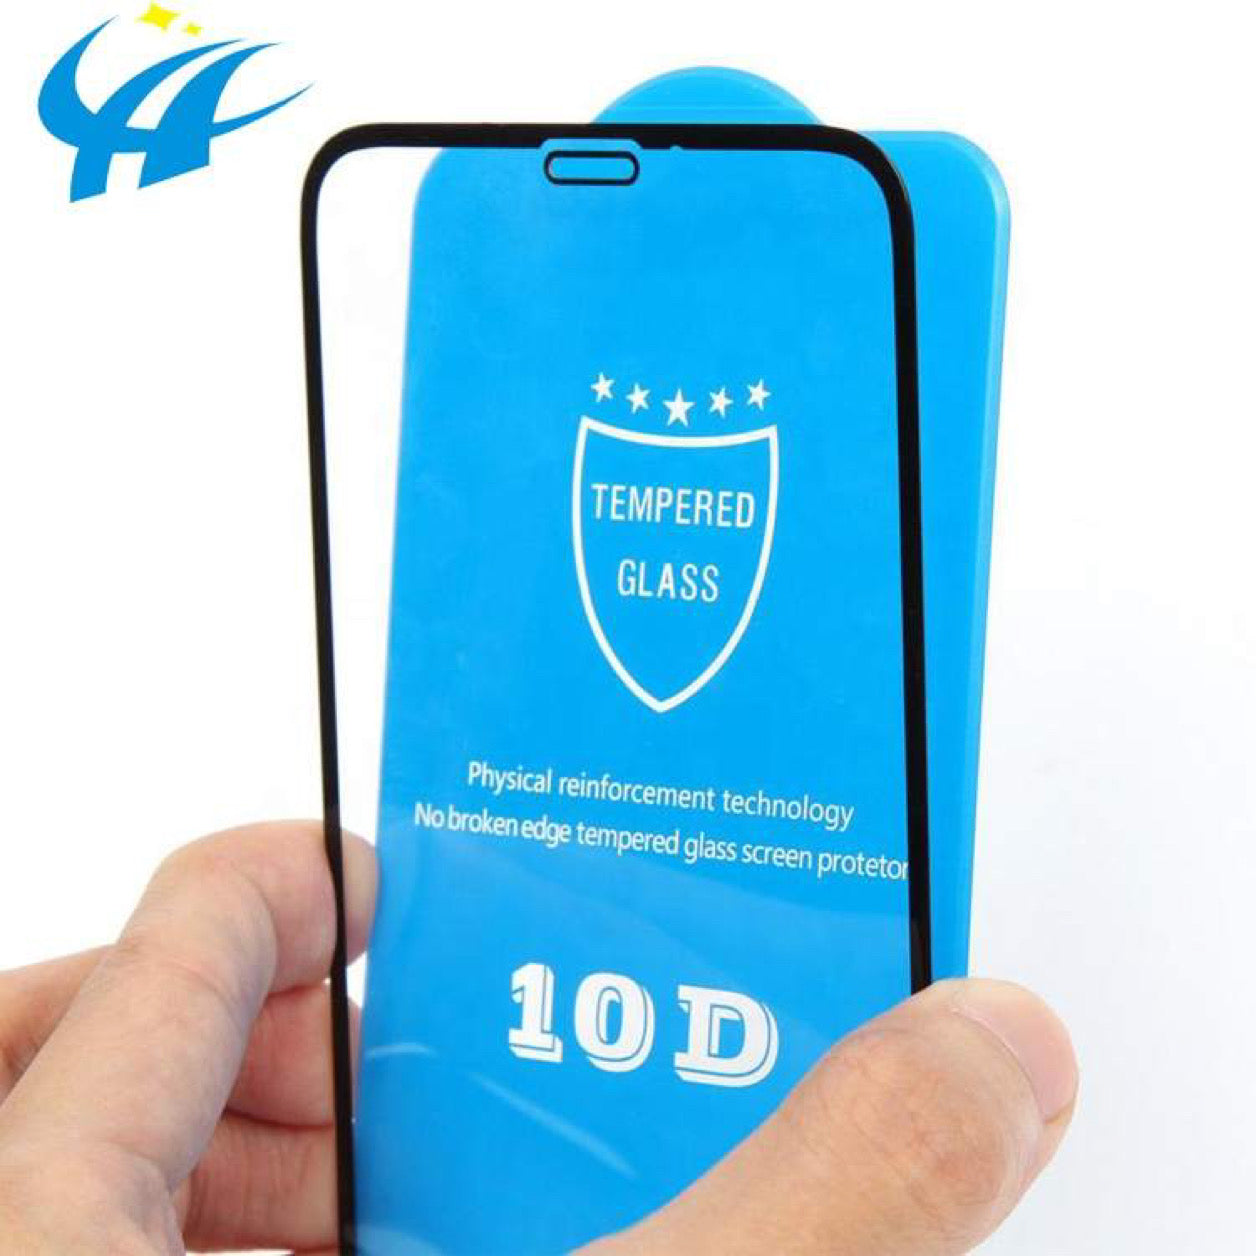 GLASS SCREEN PROTECTOR - thefonecasecompany